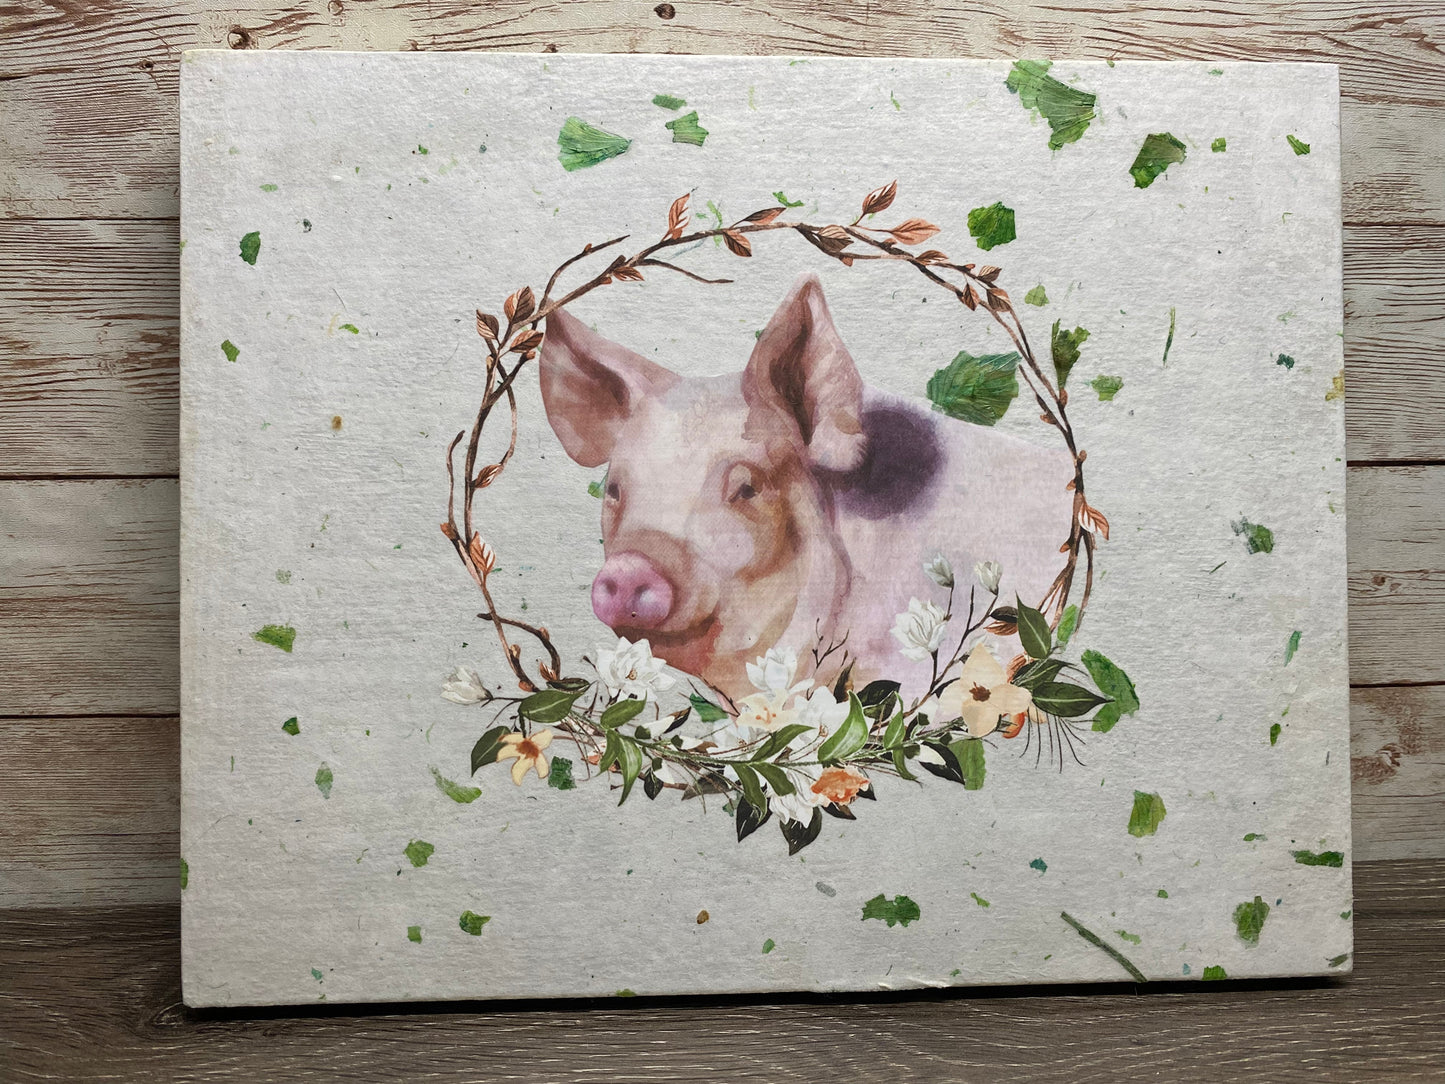 Penelope the Pig Wall Decor